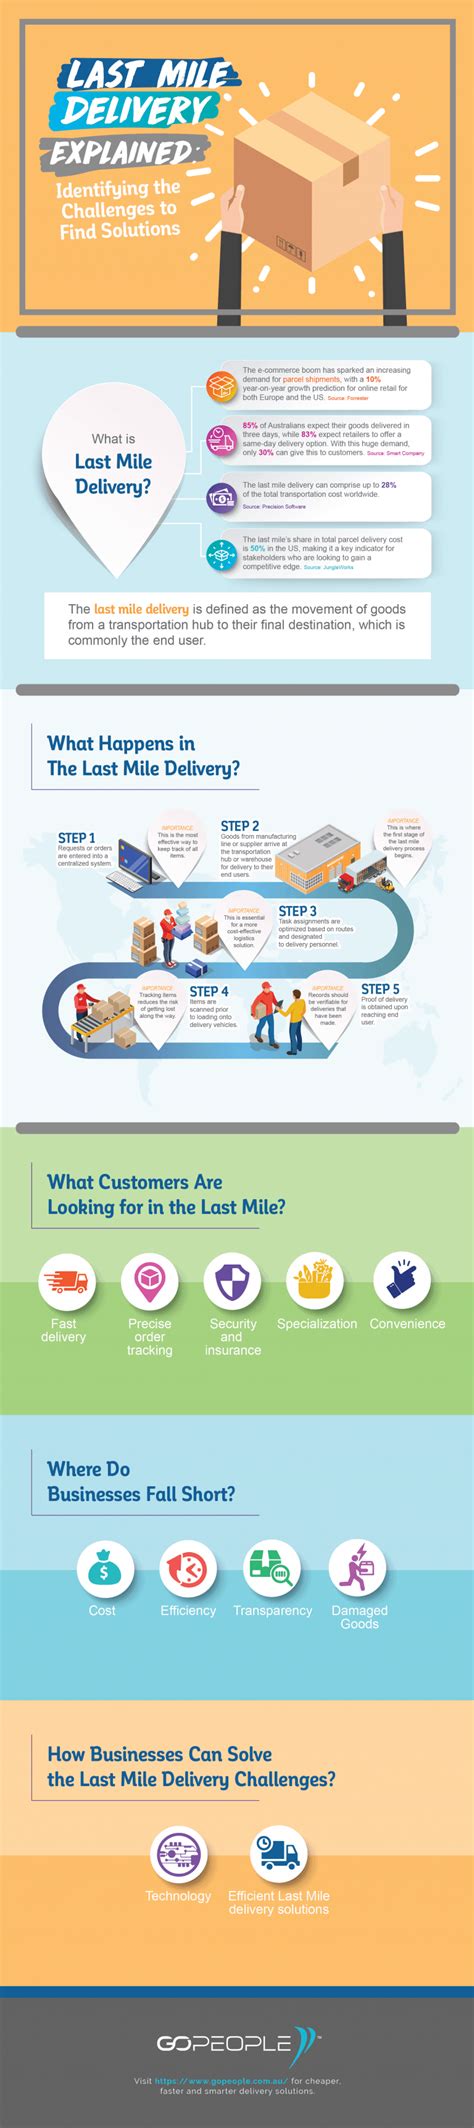 Last Mile Delivery Explained Identifying The Challenges To Find Solutions